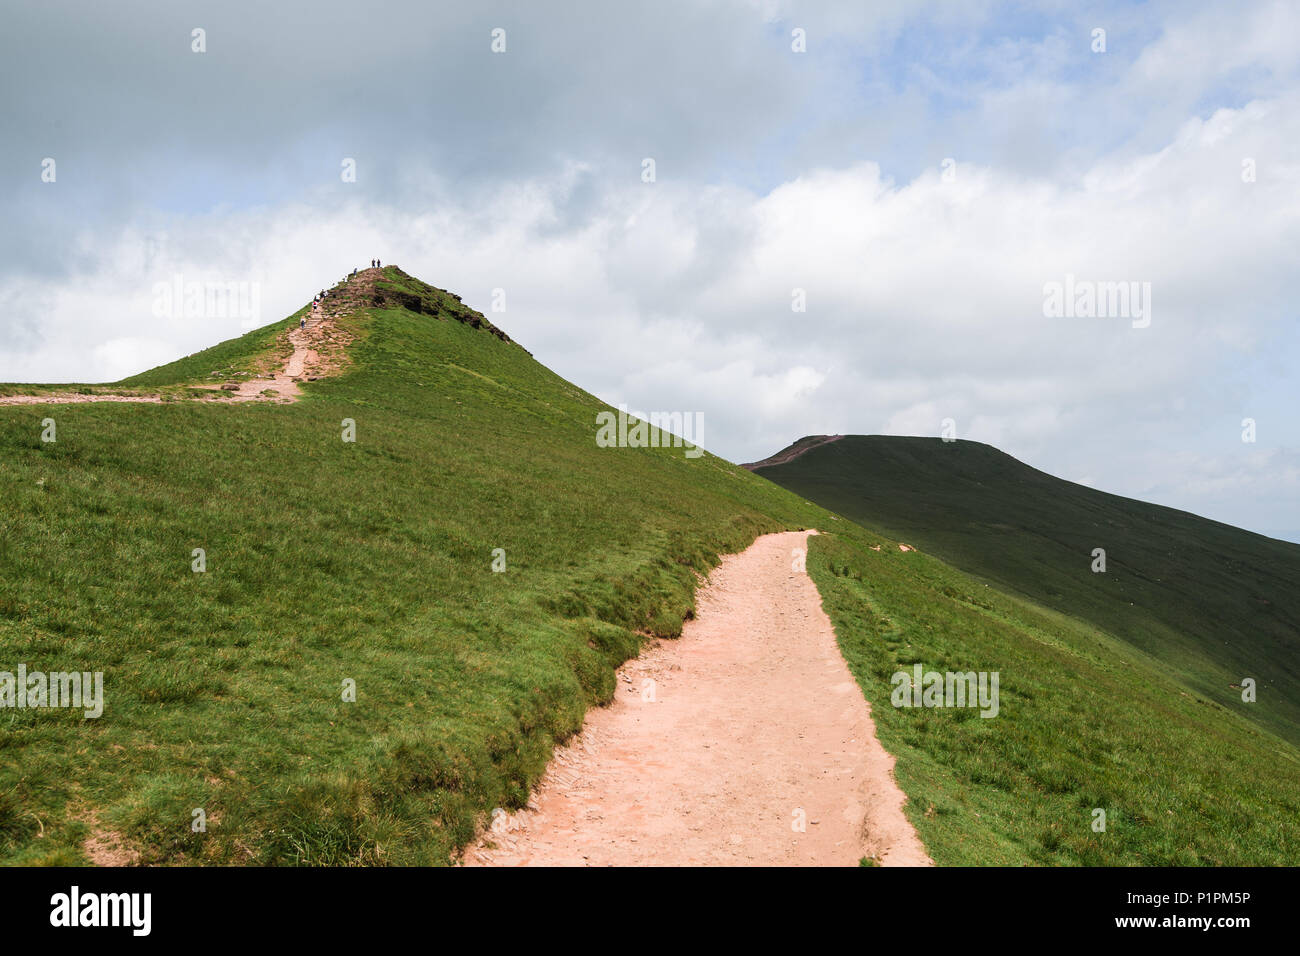 Pen Y Fan - the tallest mountain in the UK south of Snowdonia. Wales, UK. Stock Photo